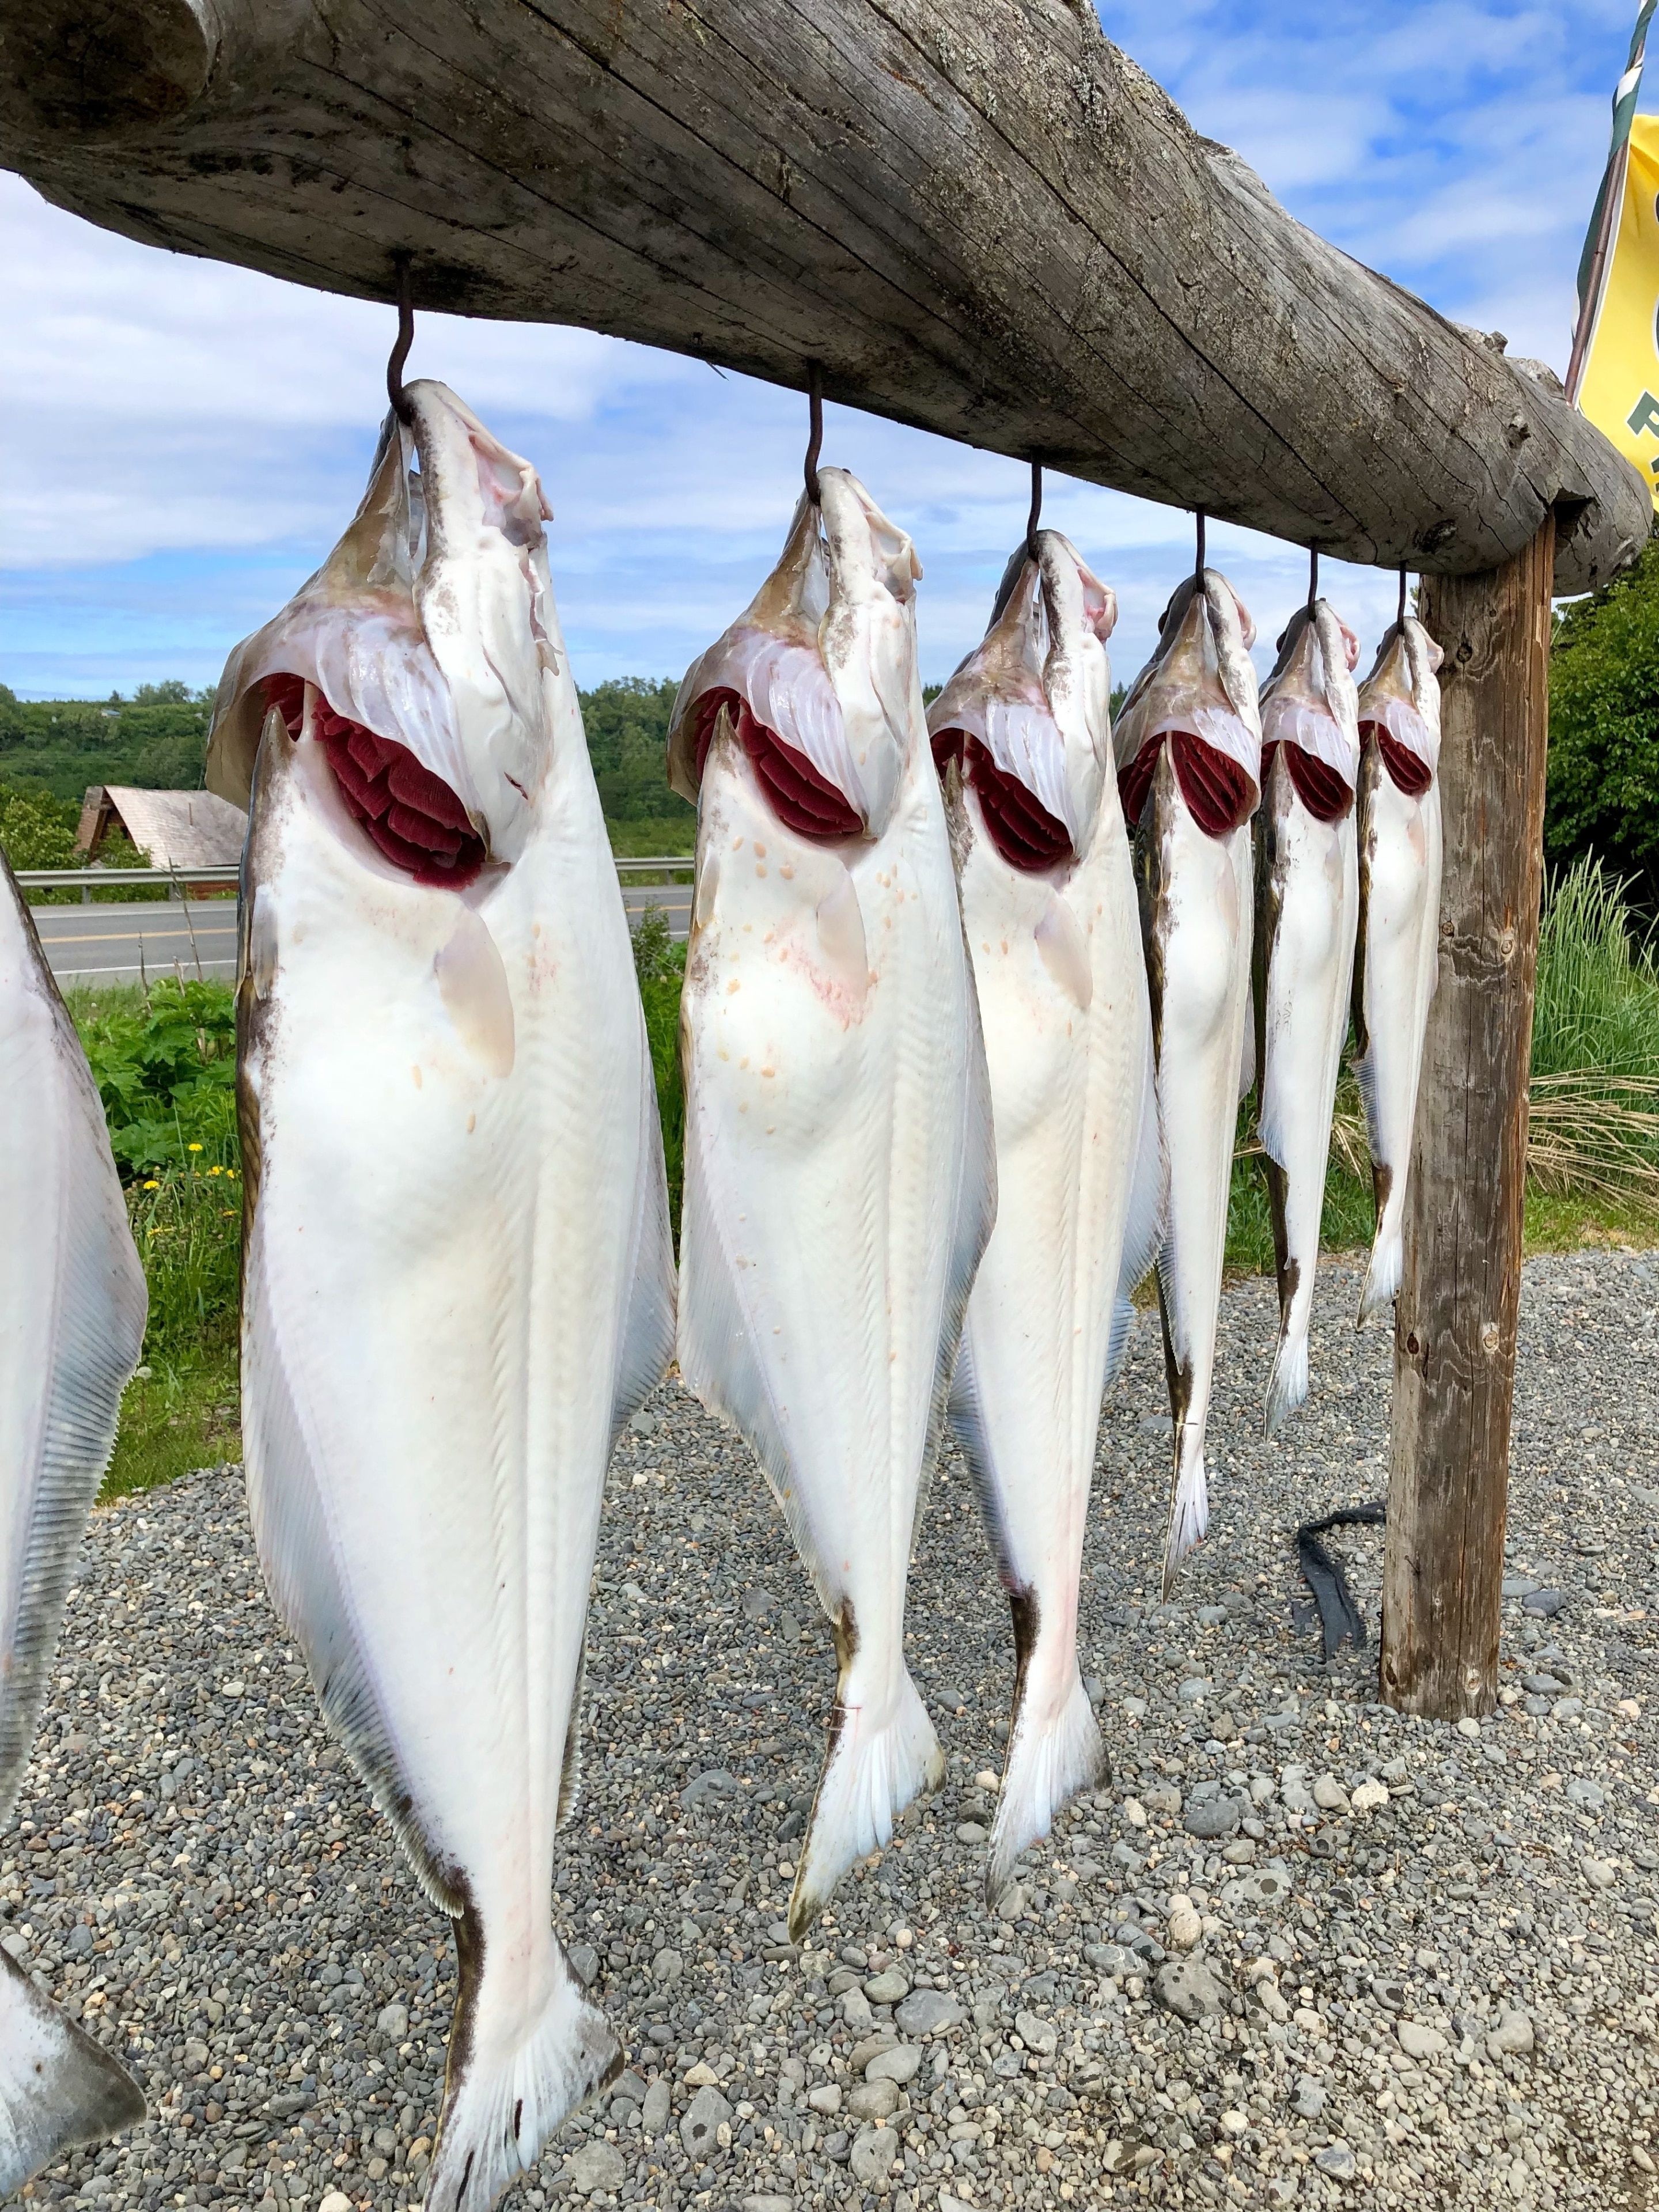 We had an amazing day fishing the Cook Inlet in Alaska. In a very short time, we had all met our catch limit of halibut. If you are visiting the Kenai peninsula, you should give the fishing a try. 

Don’t these fish have some beautiful red gills?